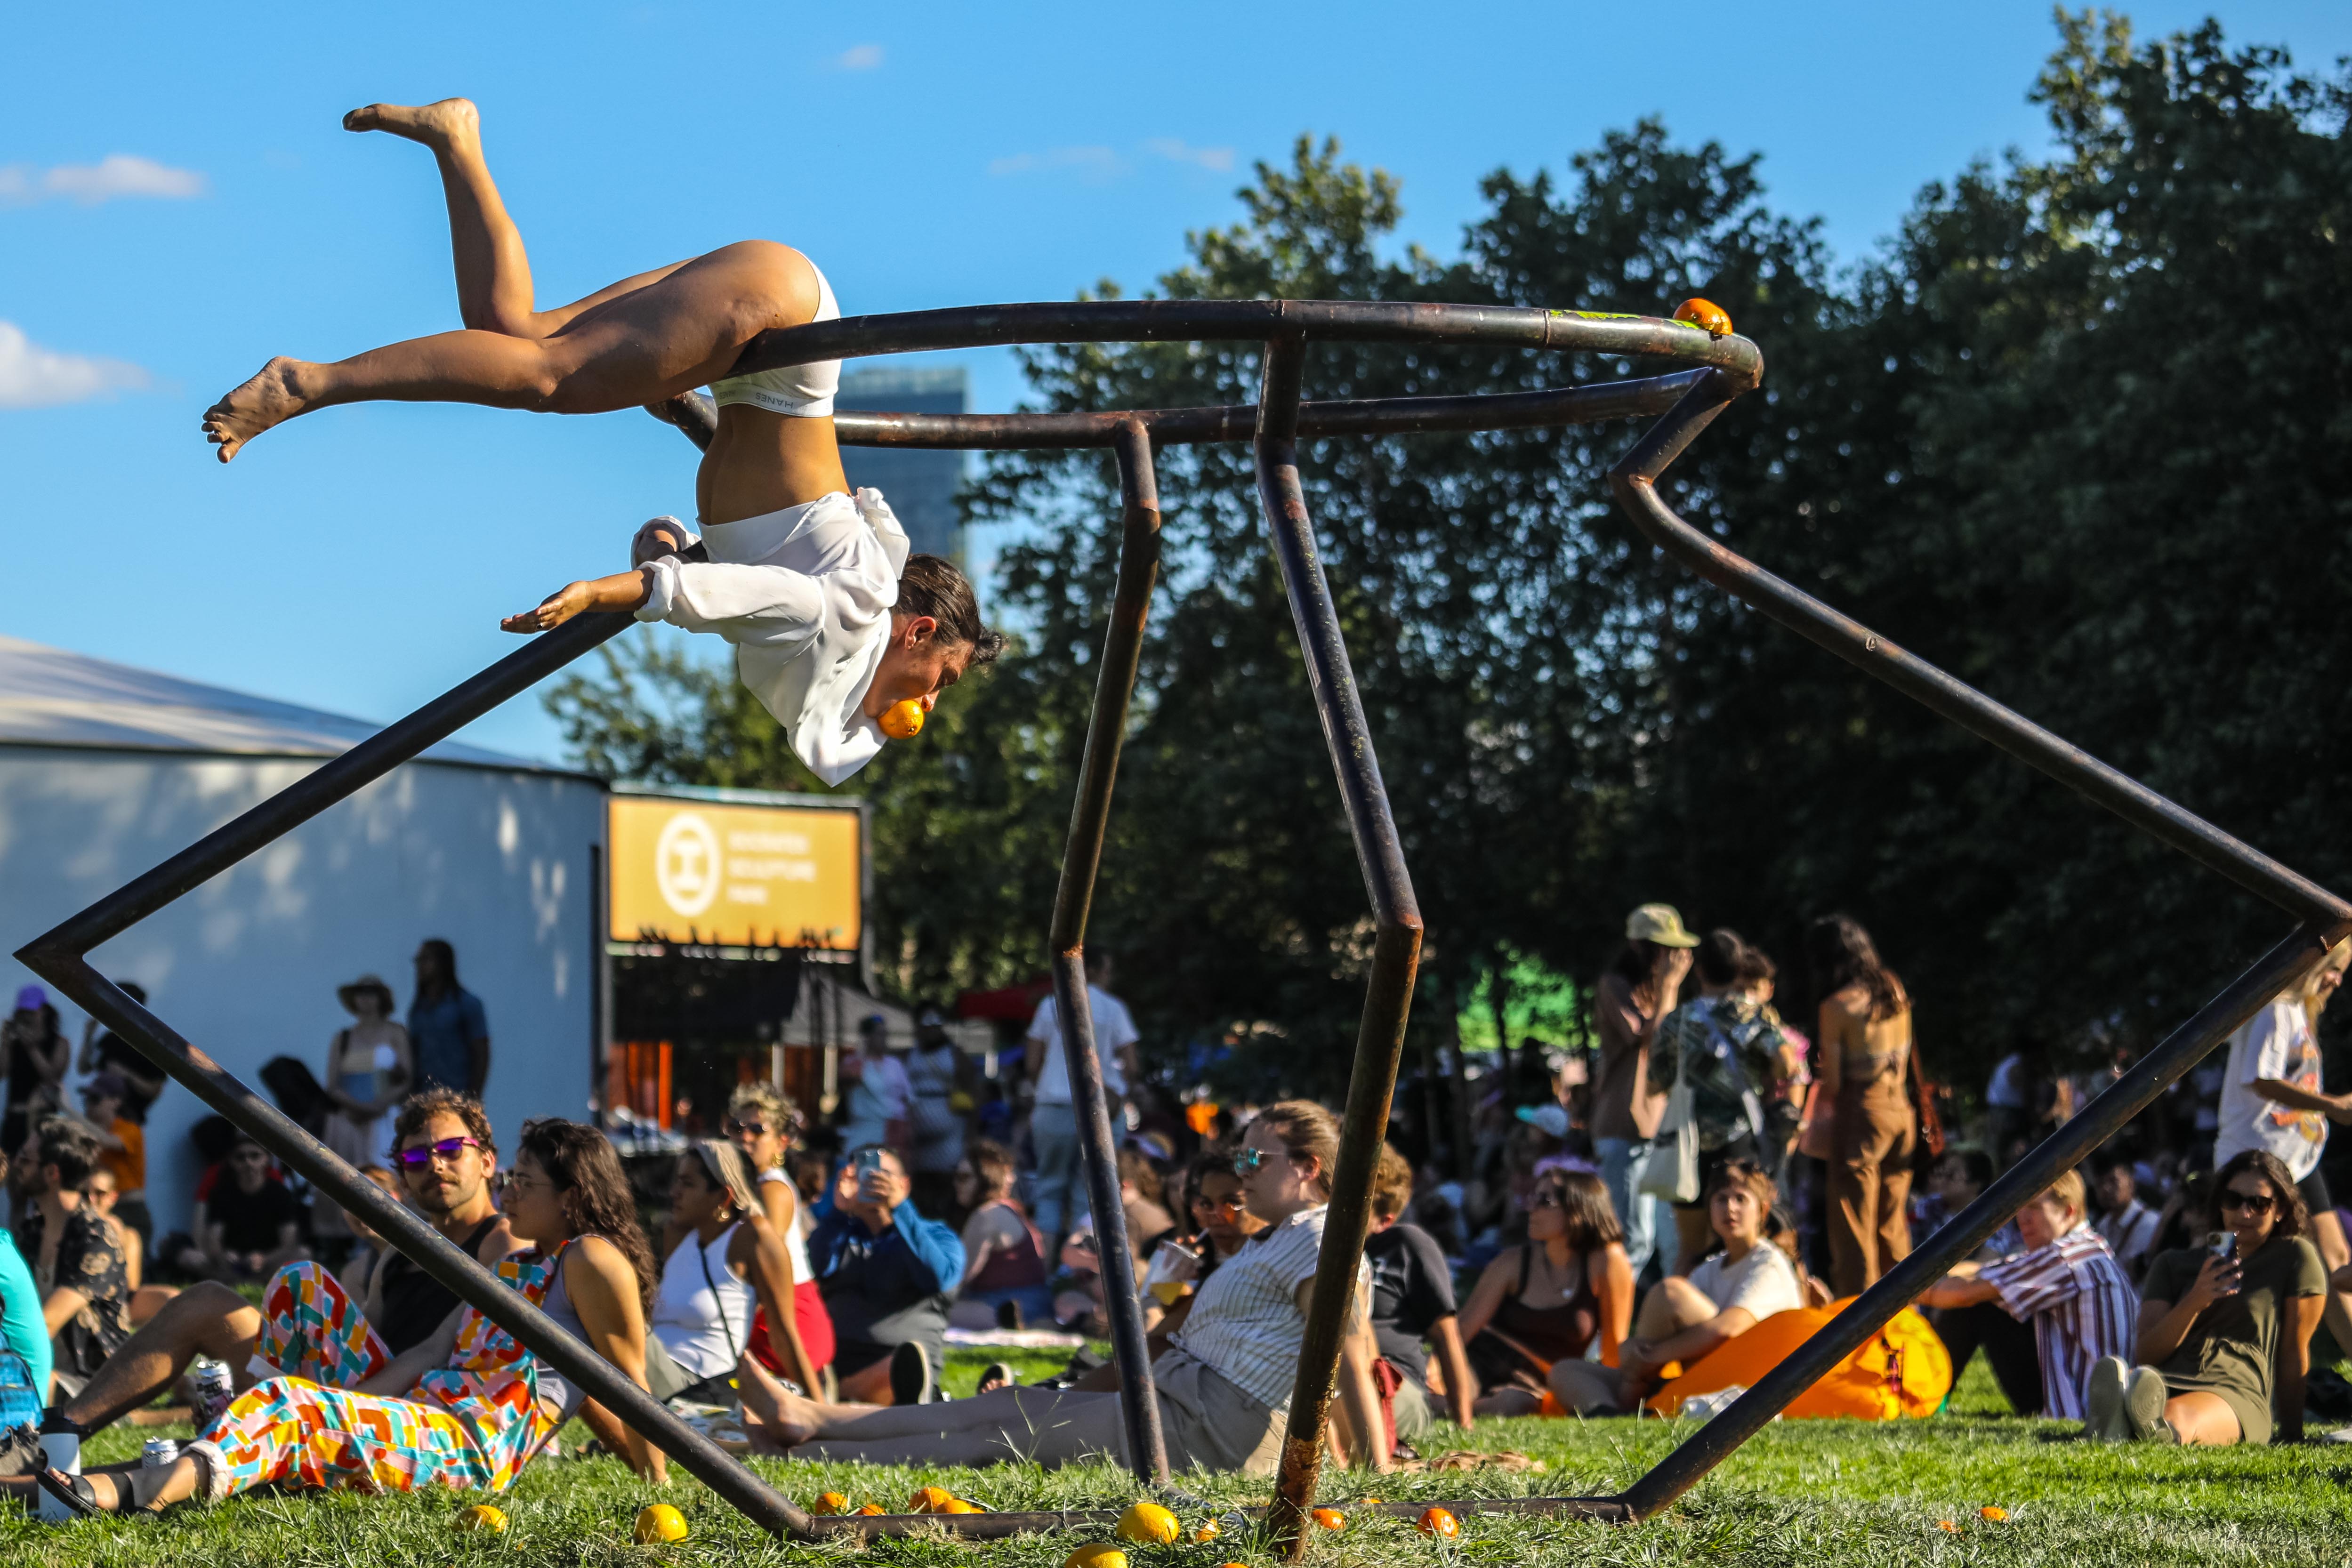 A performer acrobatically hangs from a steel sculpture while holding an orange in their mouth. A crowd of people sit on grass in the background.